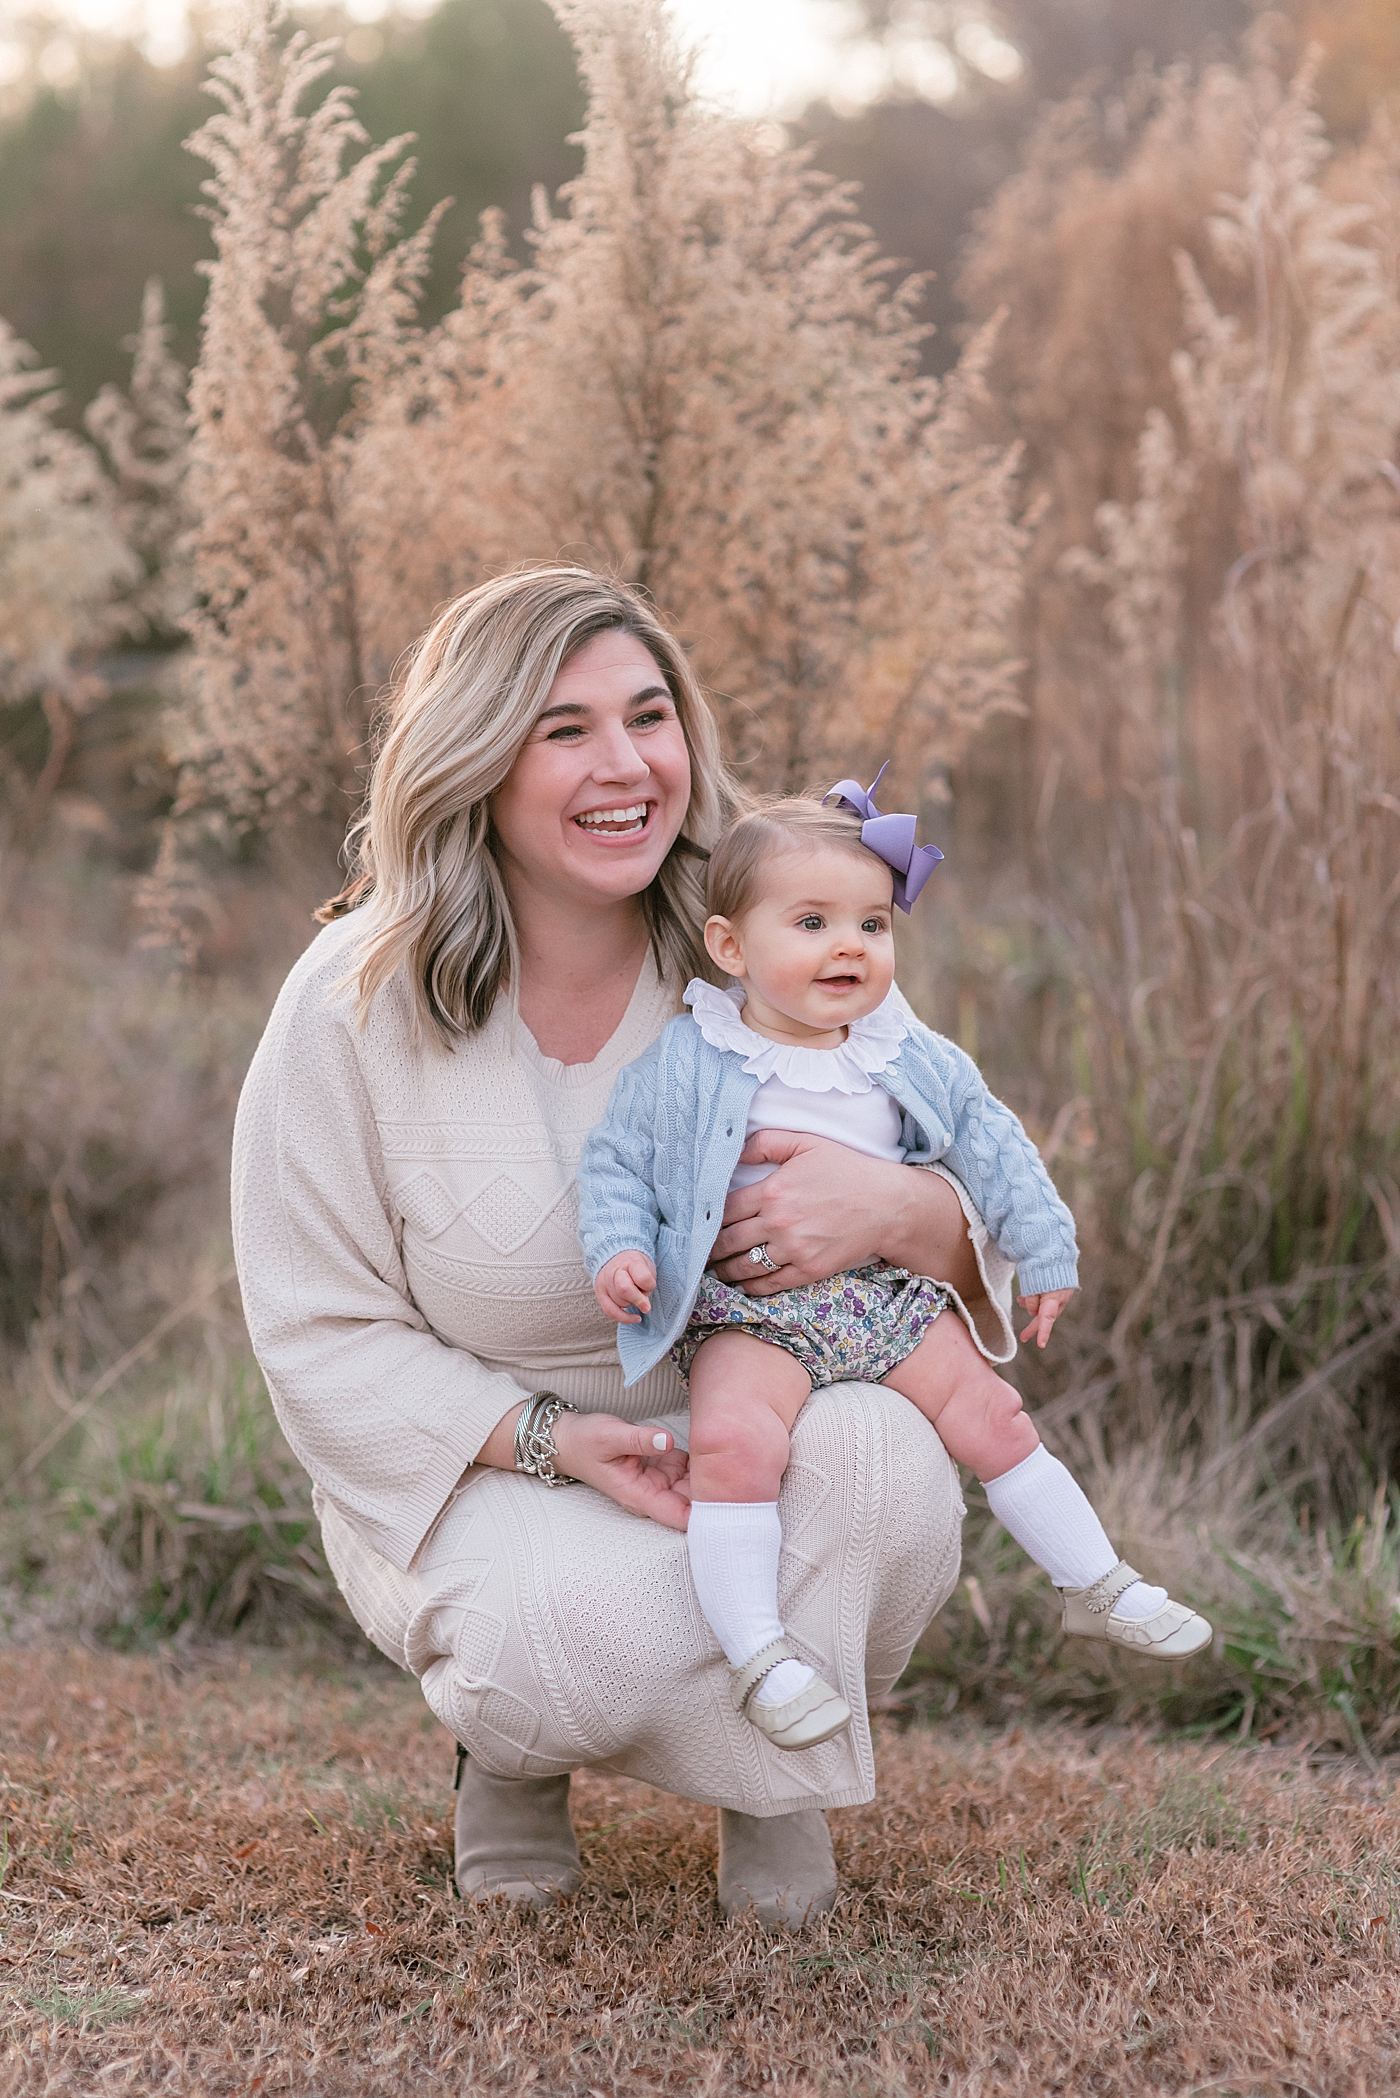 Mom with her baby girl sitting in a field during her Milestone Session at Marvin Efird Park | Photo by Anna Wisjo Photography 